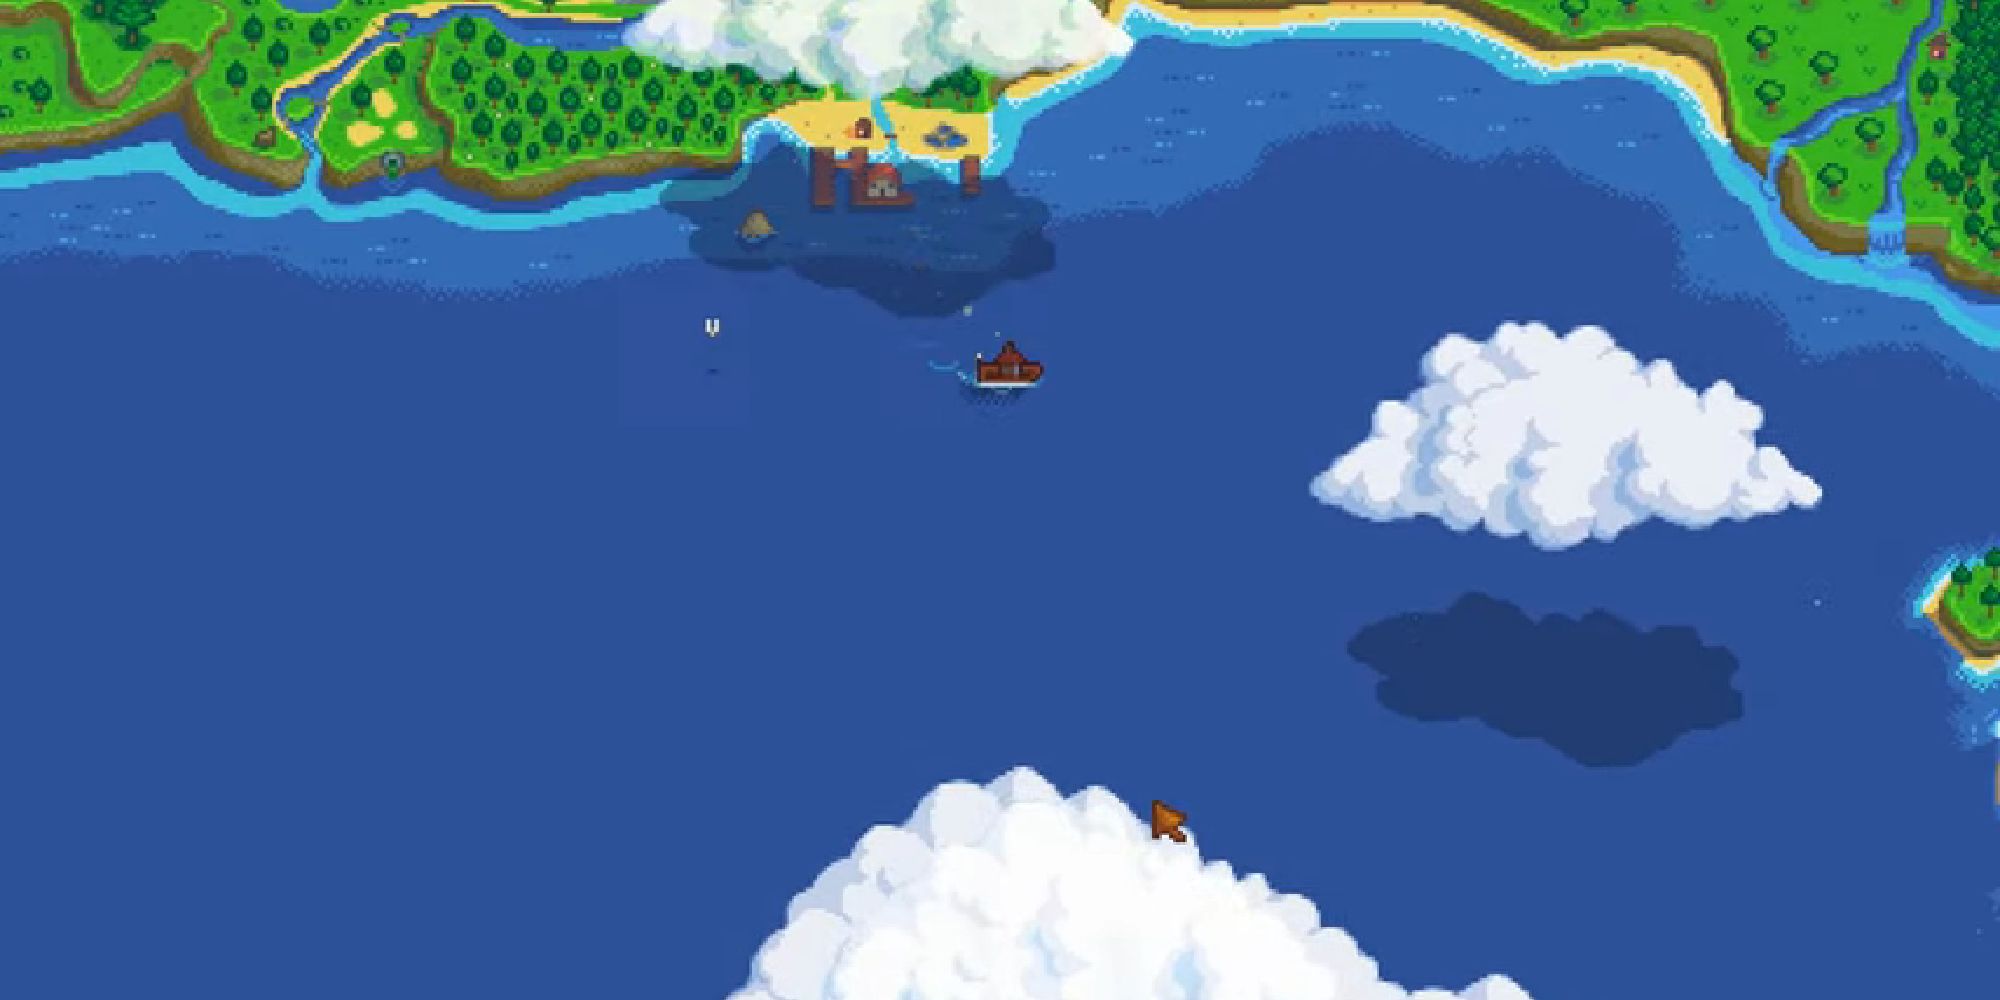 stardew valley boat ride animation to ginger island